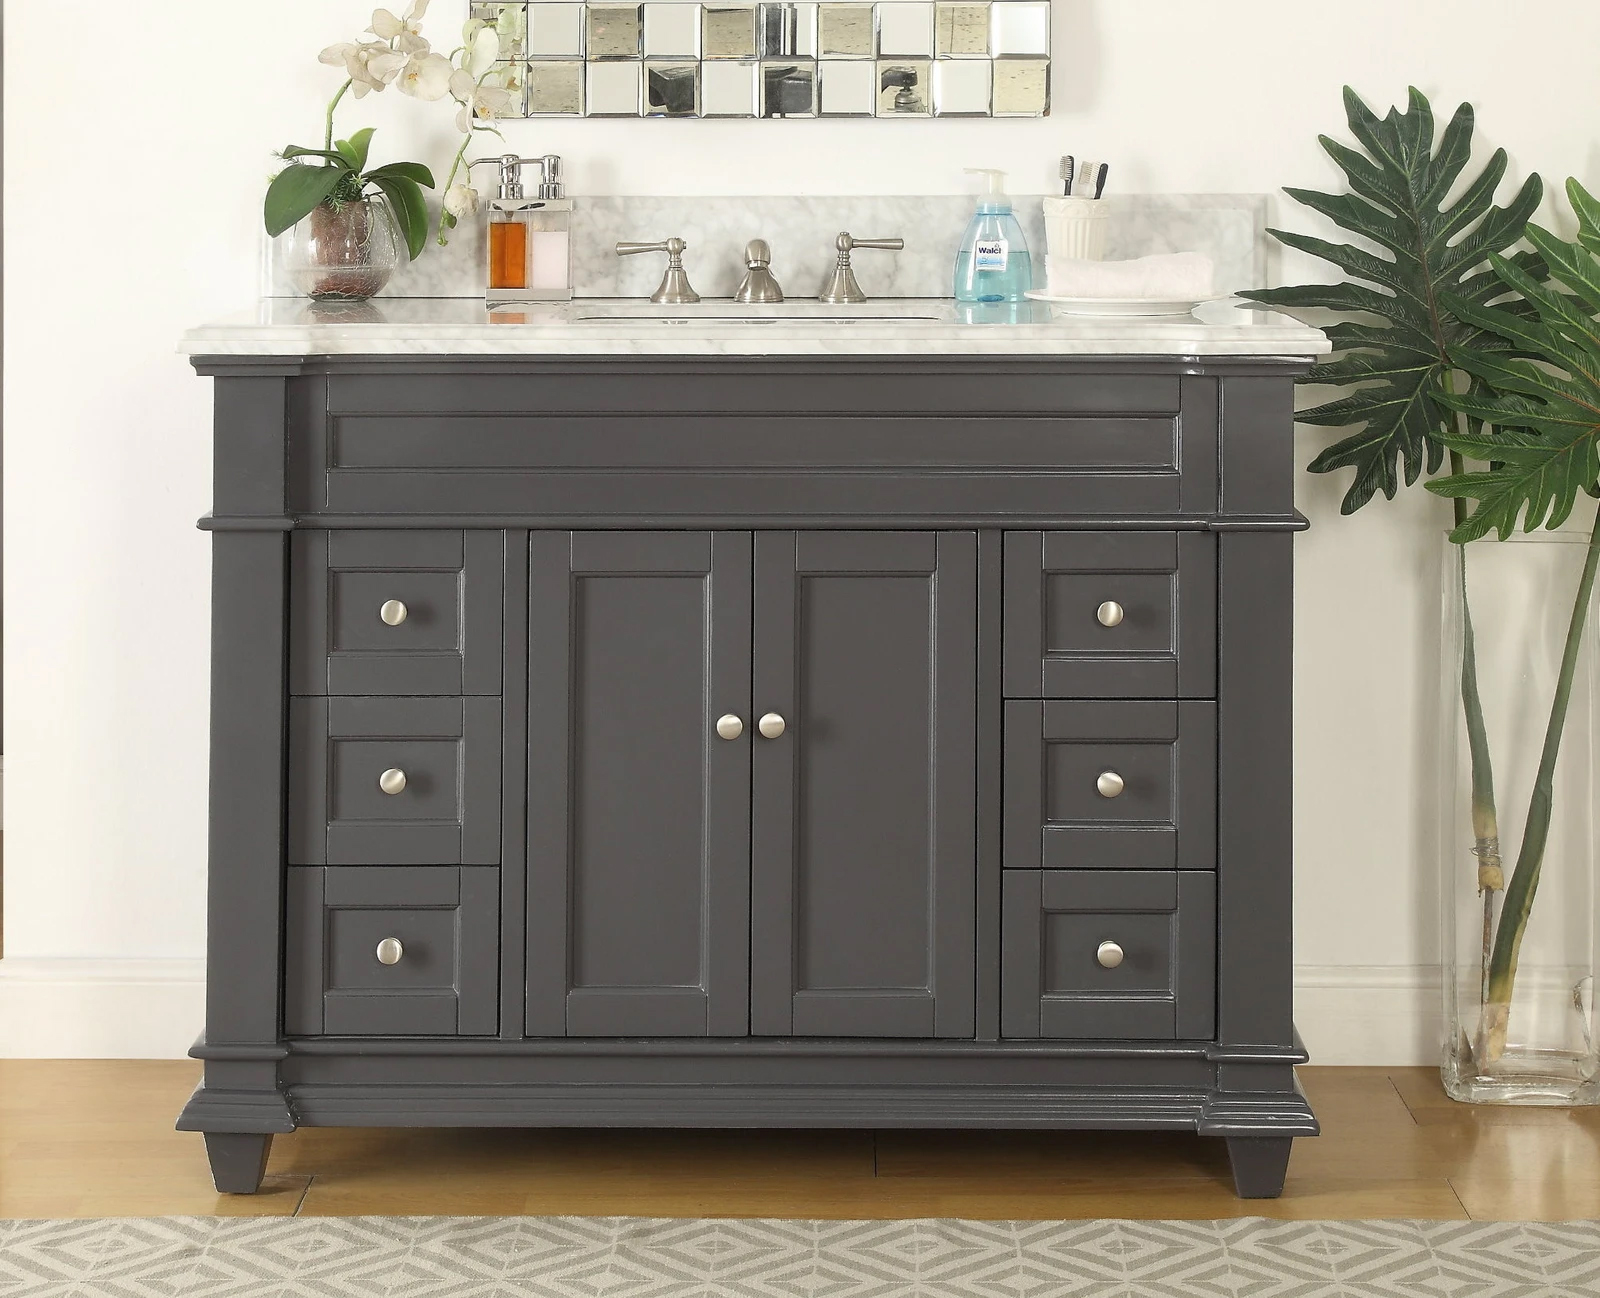 48 Bathroom Vanity With Counter